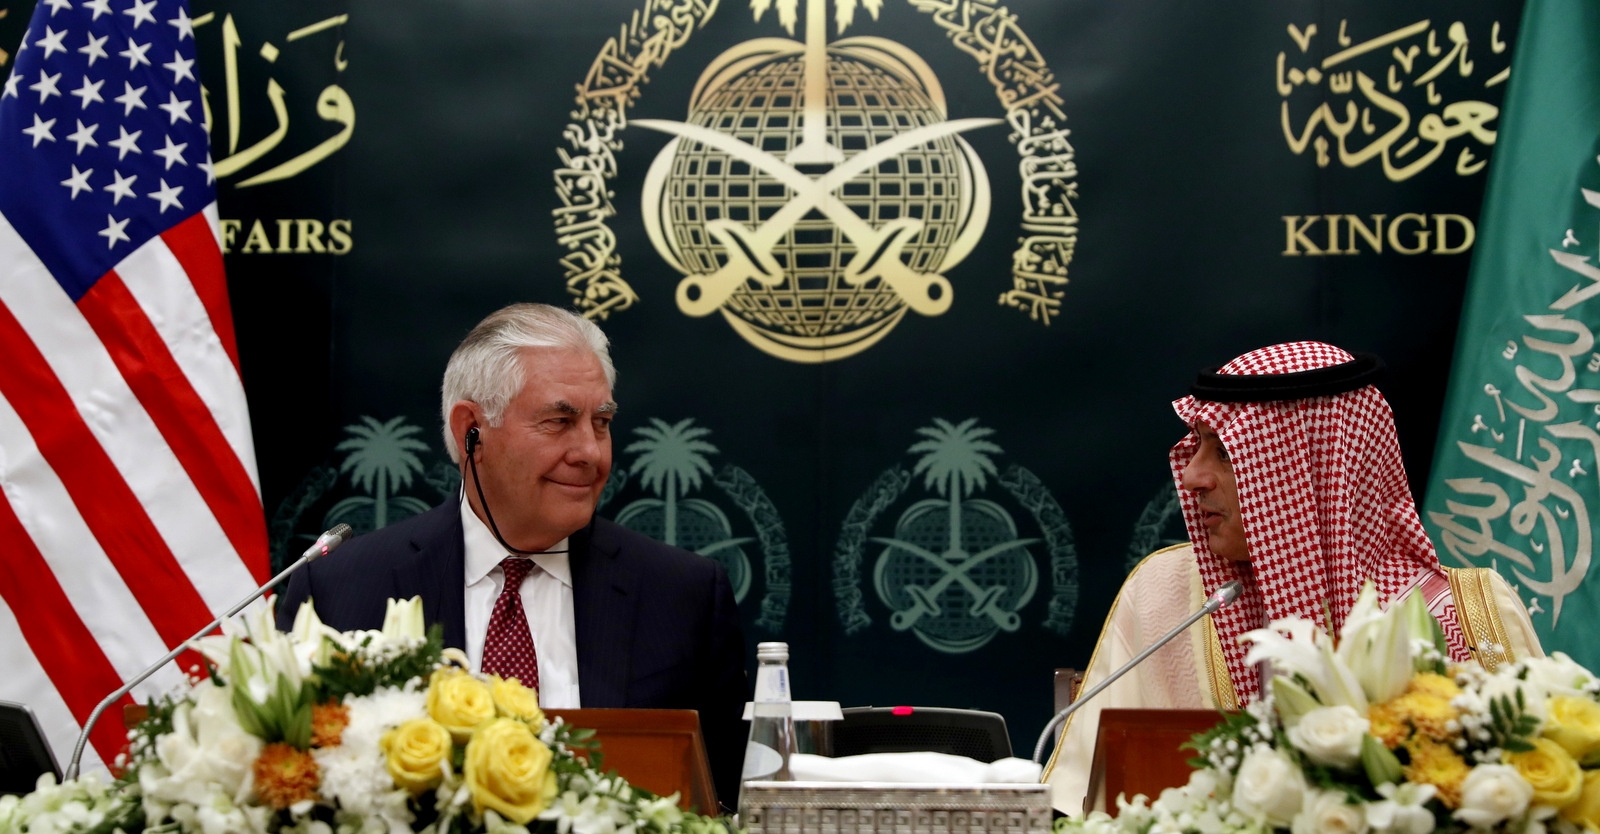 Secretary of State Rex Tillerson listens during a press conference with Saudi Foreign Minister Adel Ahmed Al-Jubeir, Oct. 22, 2017, in Riyadh, Saudi Arabia. (AP/Alex Brandon)